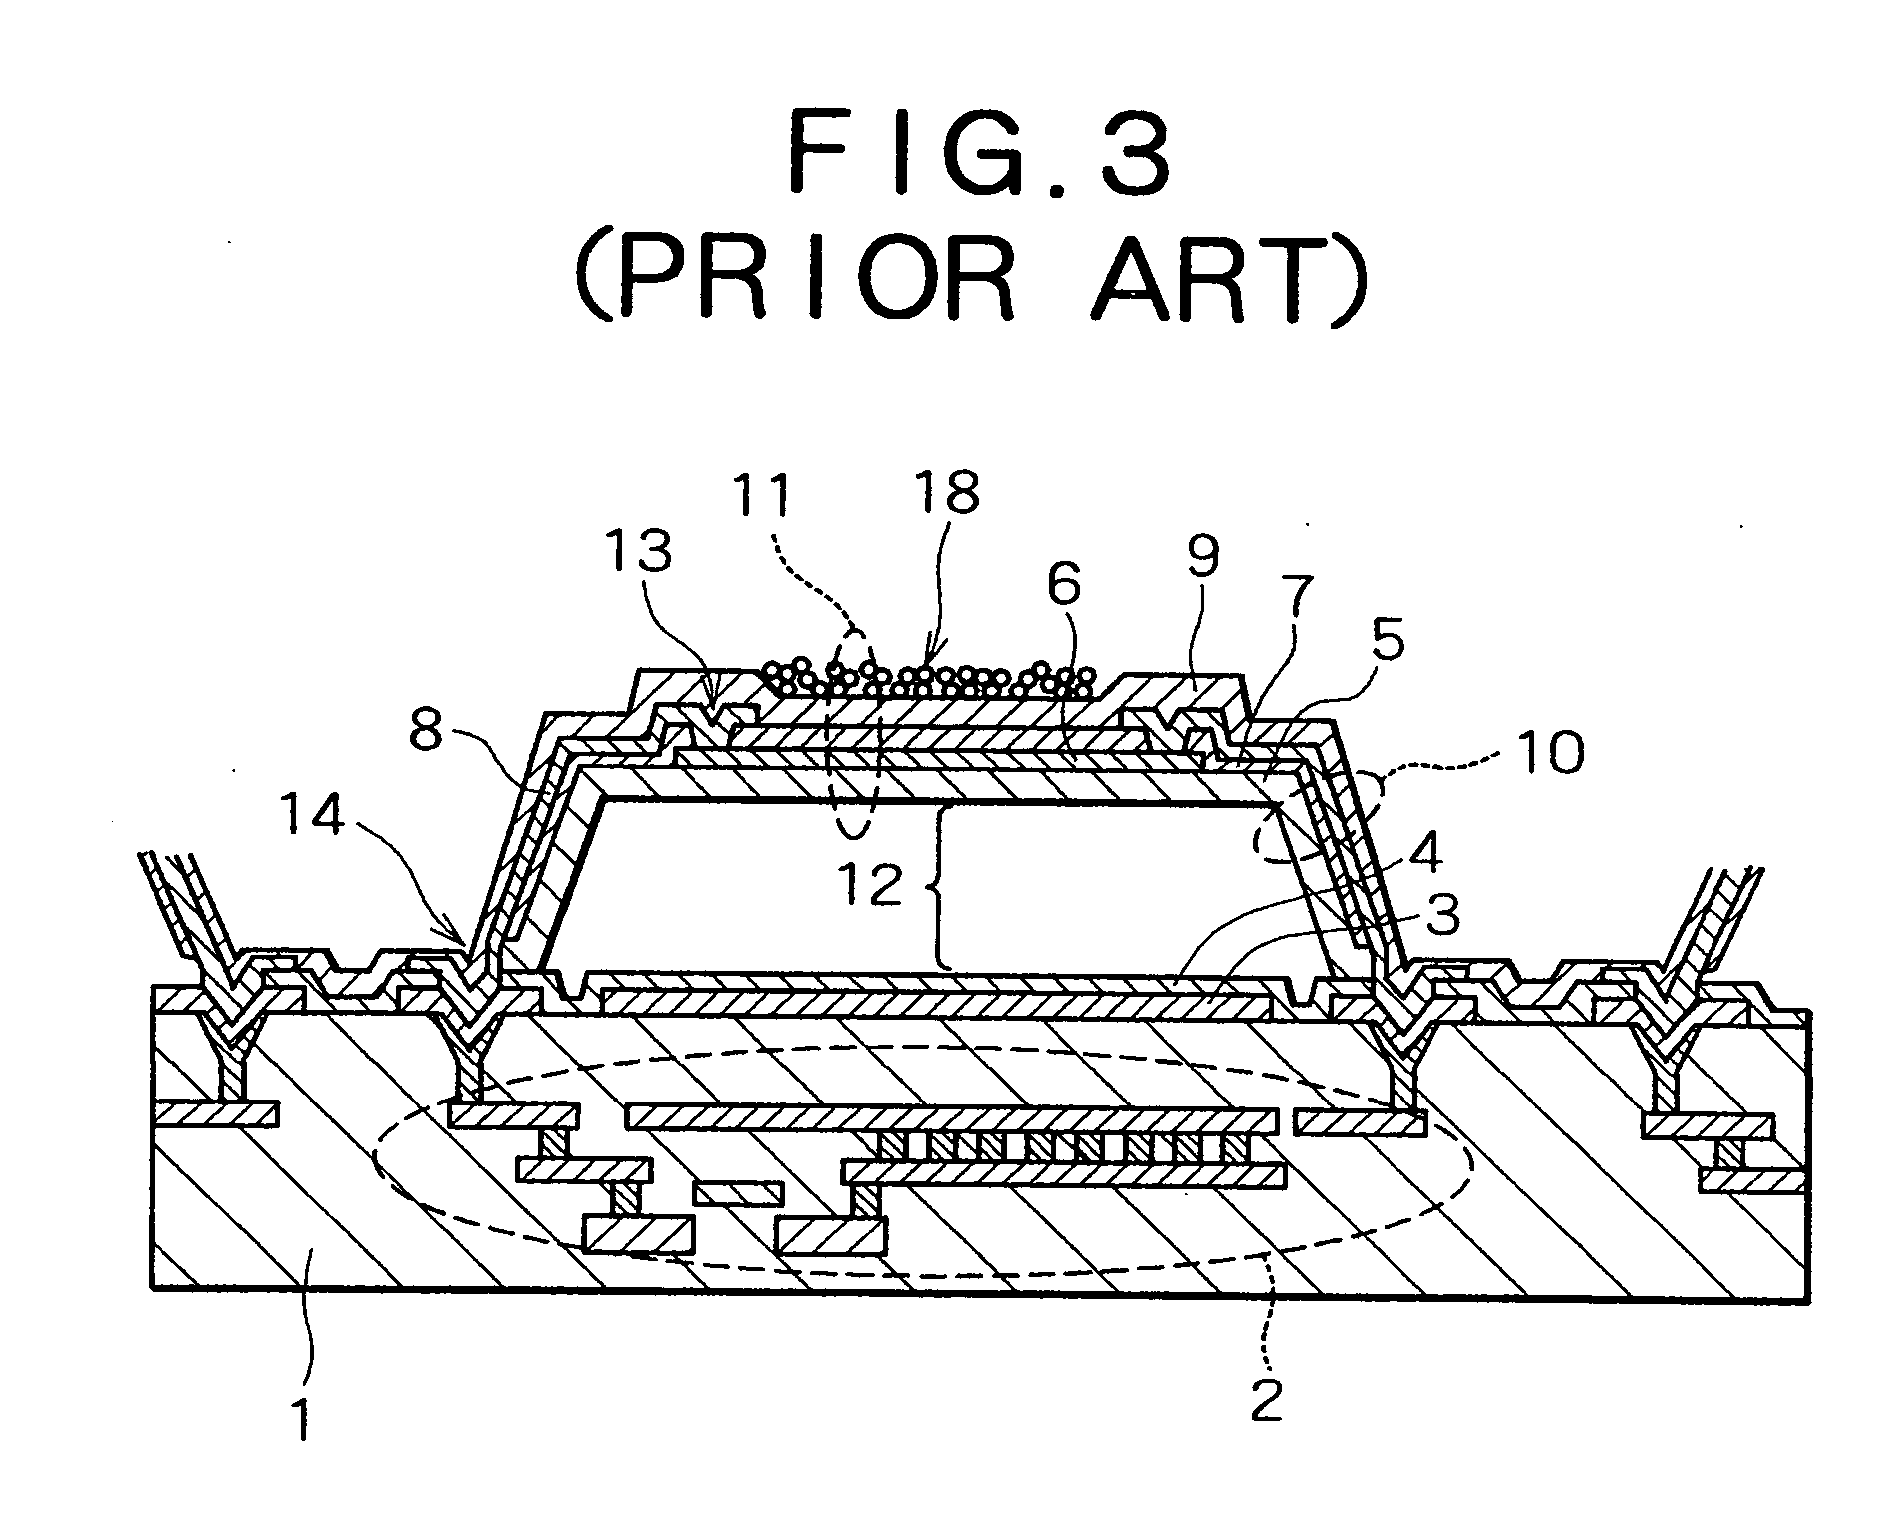 Thermal-type infrared detection element